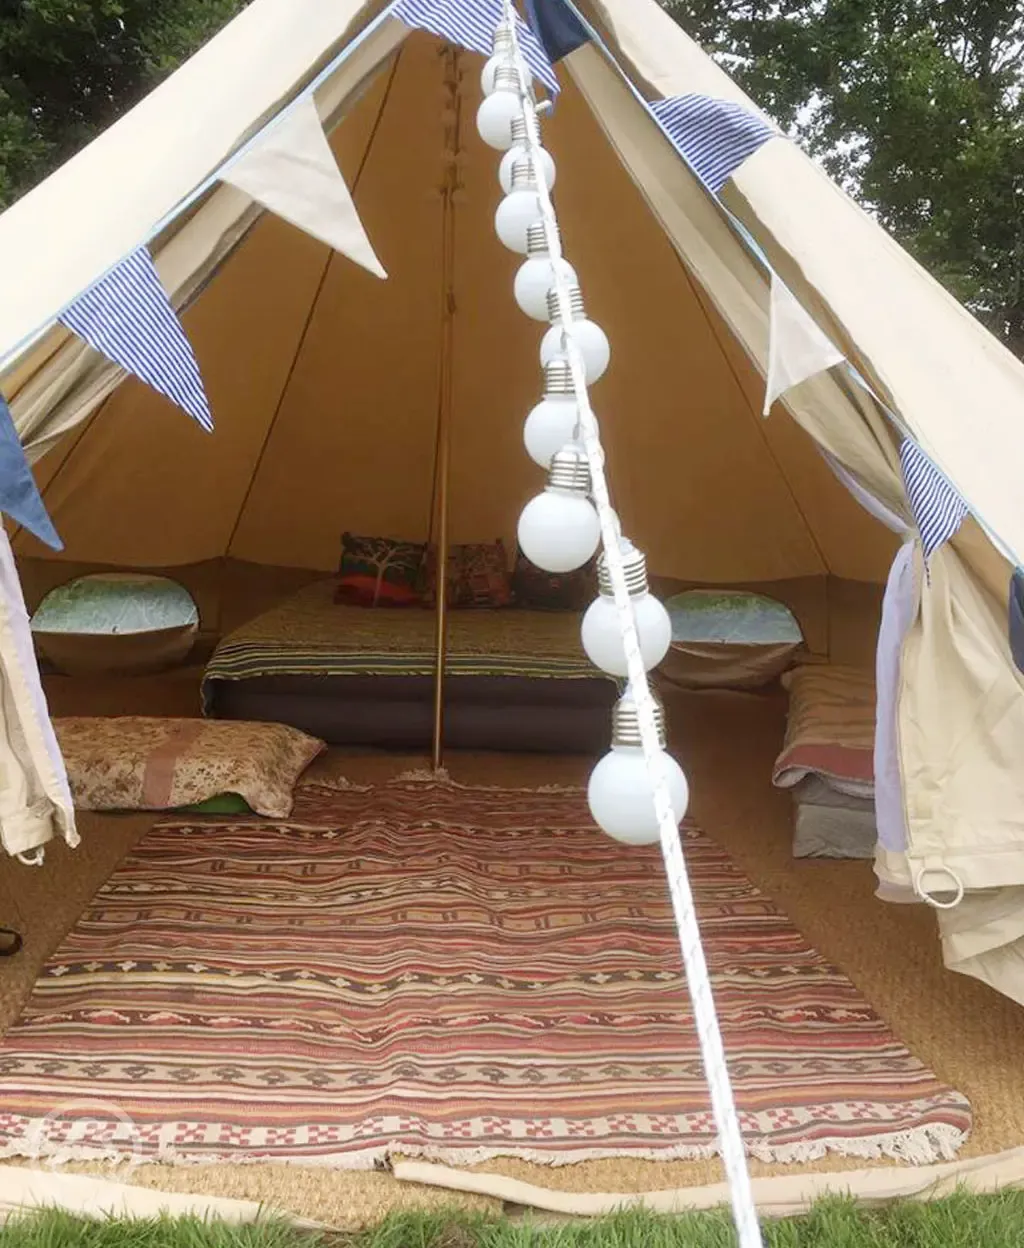 Bell tent at Five Wyches Farm Campsite